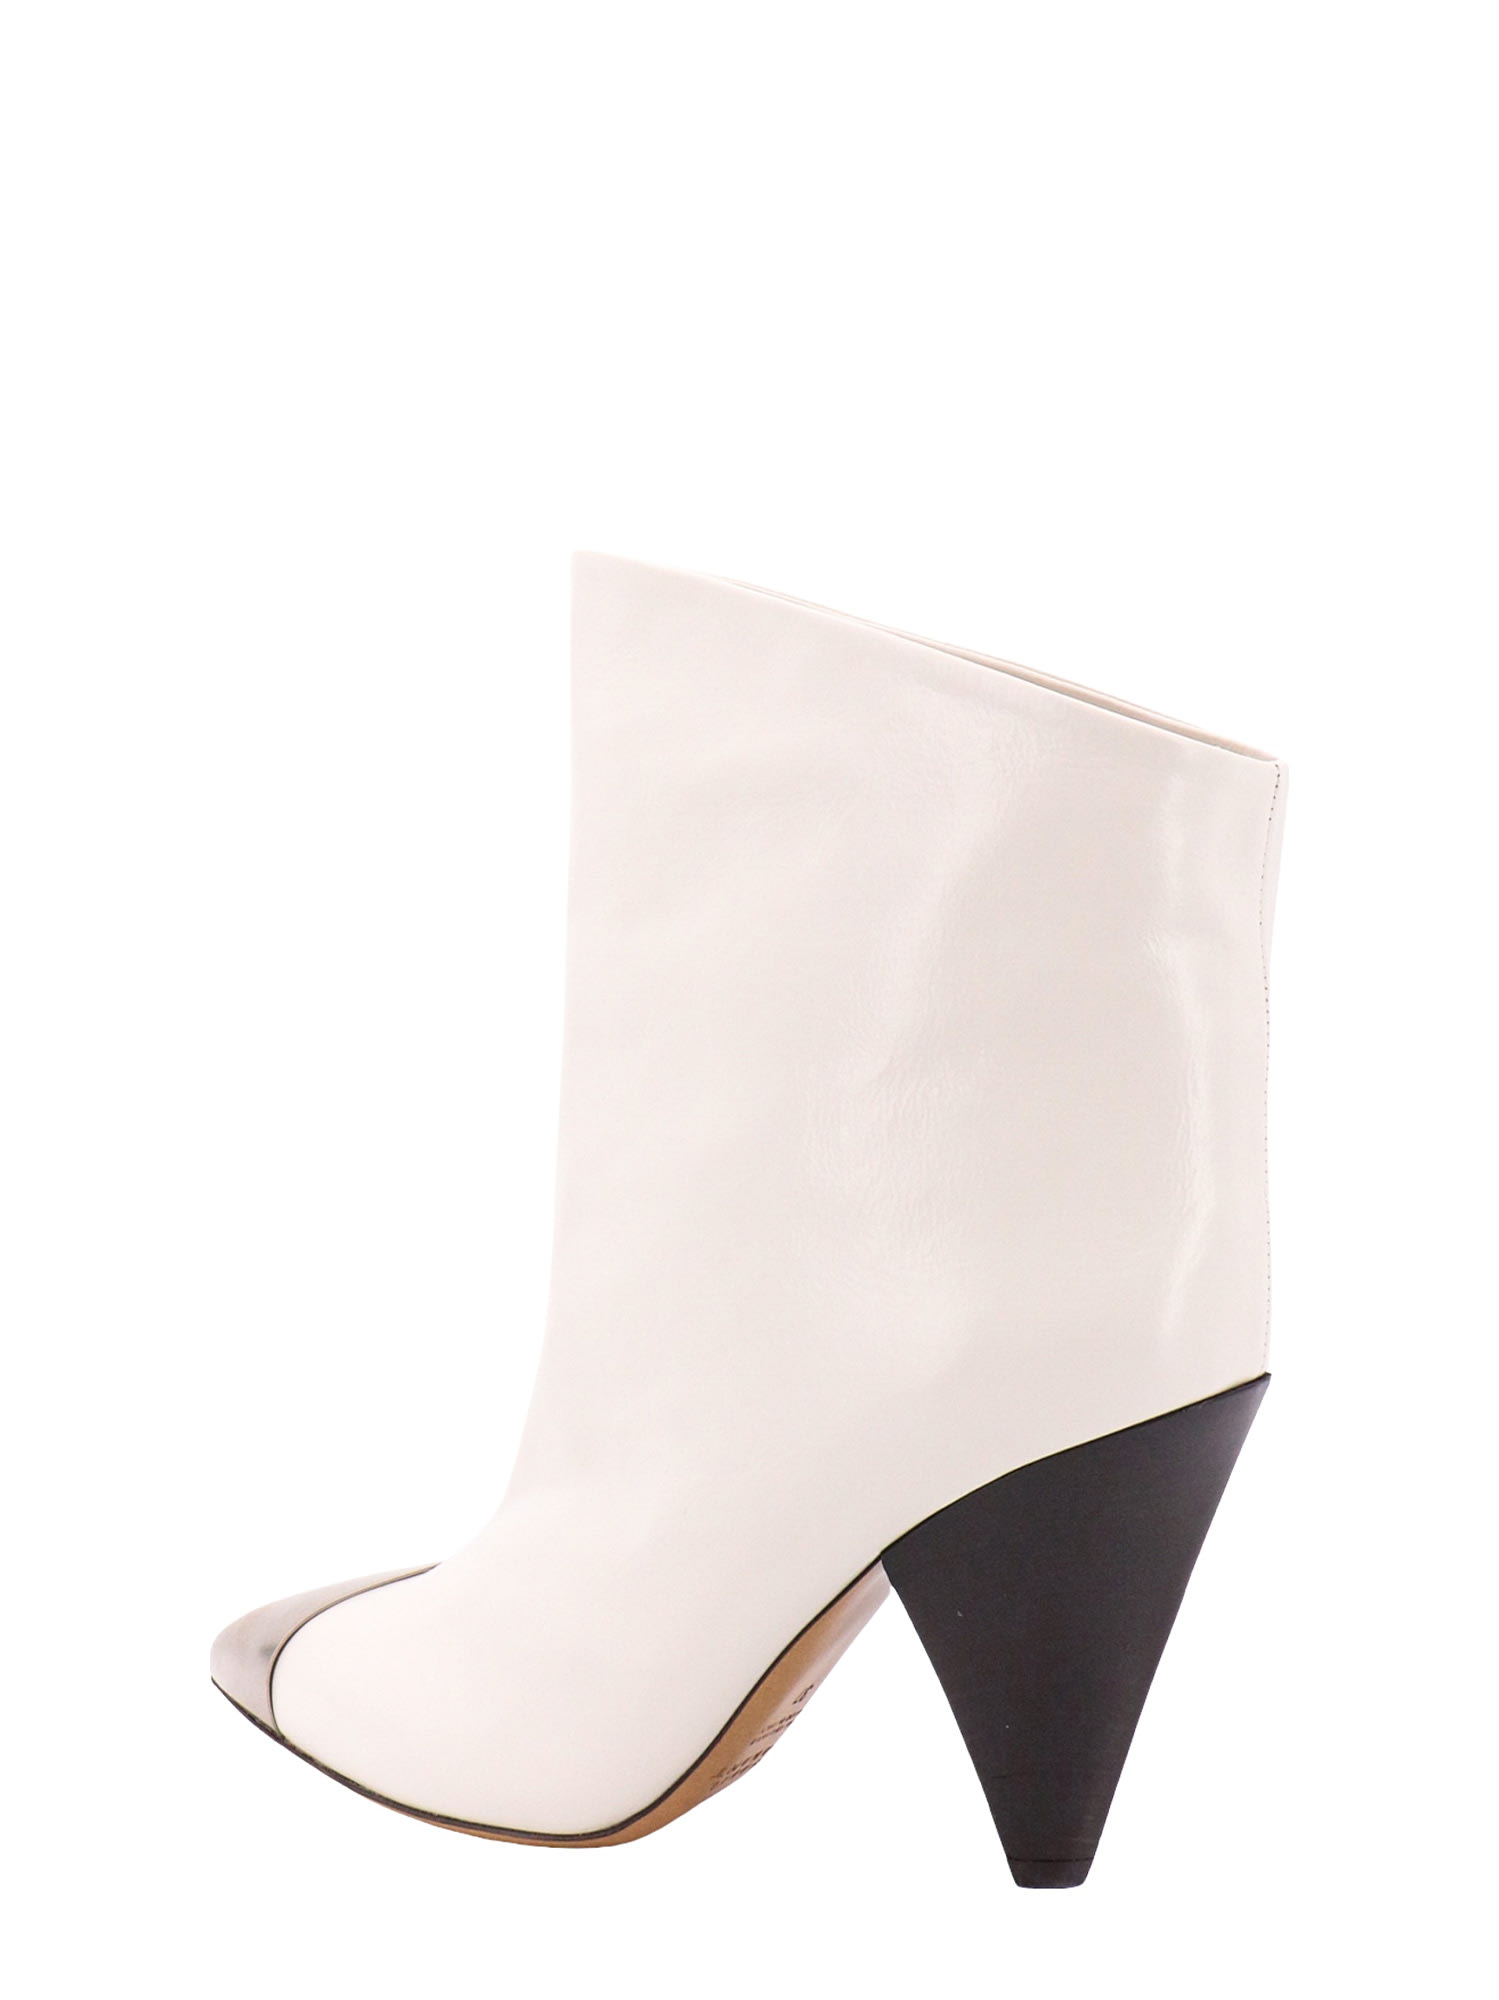 Shop Isabel Marant Lapio Ankle Boots In White